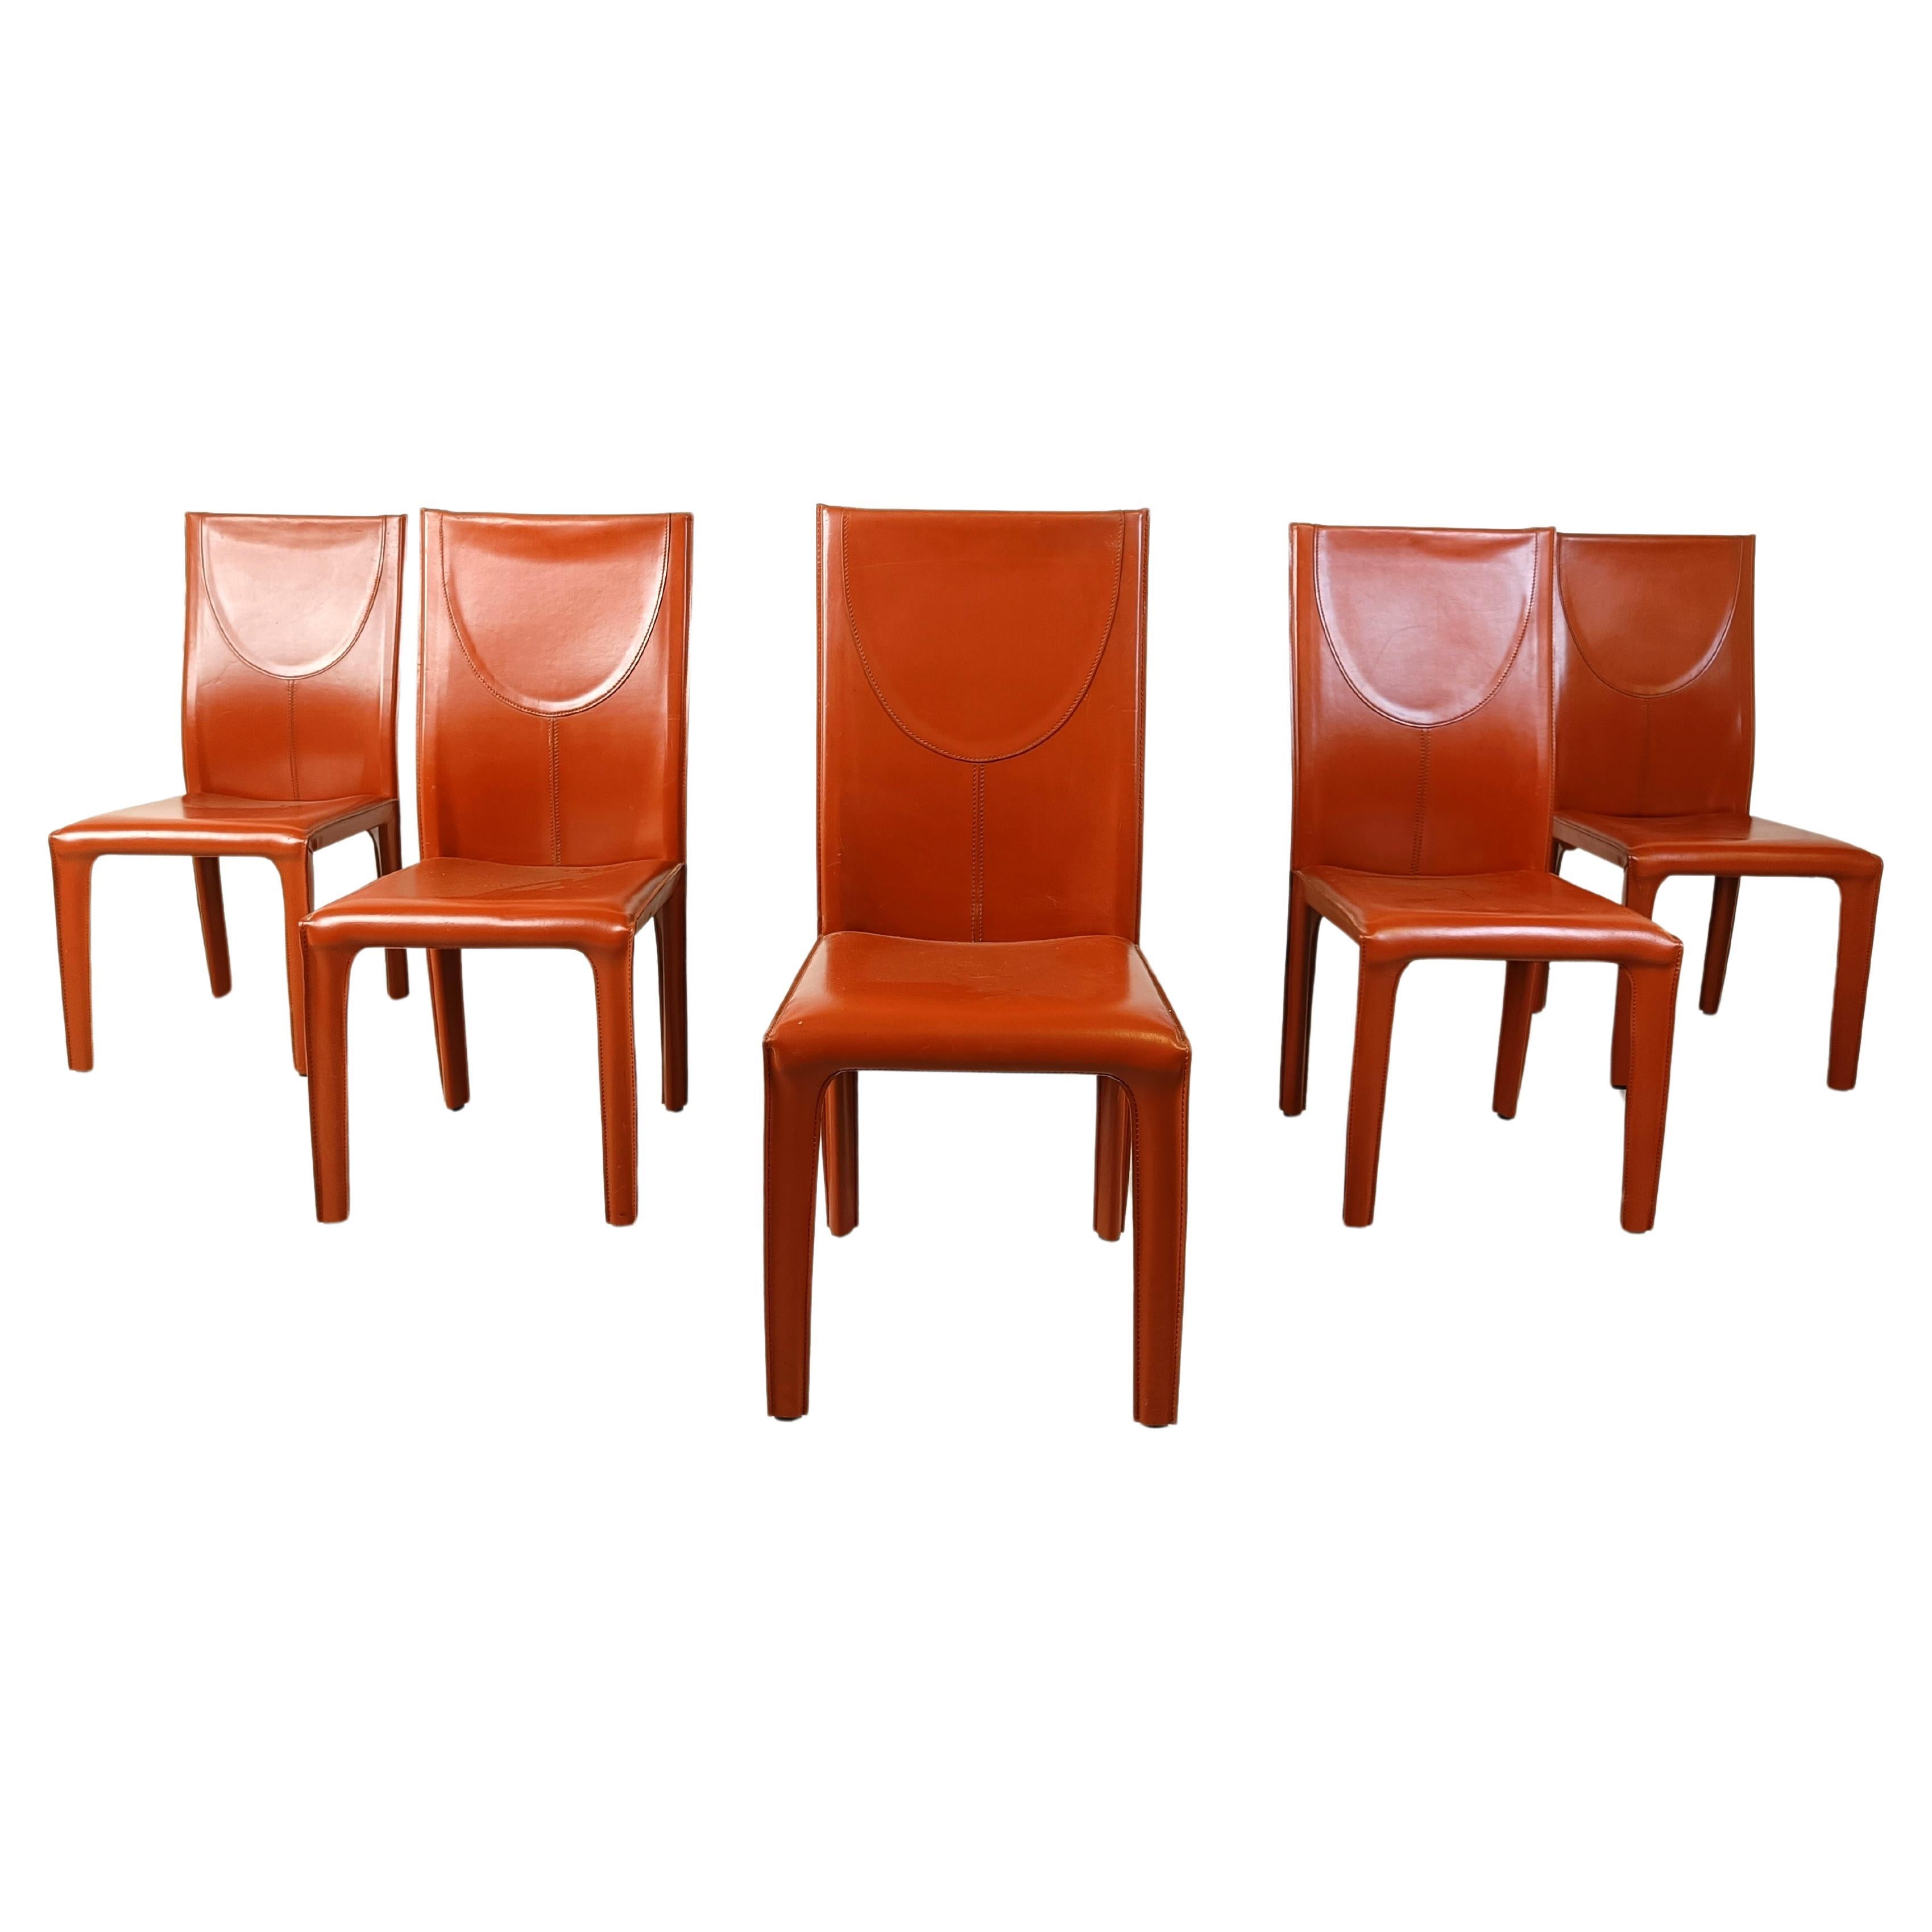 Arper Dining Room Chairs